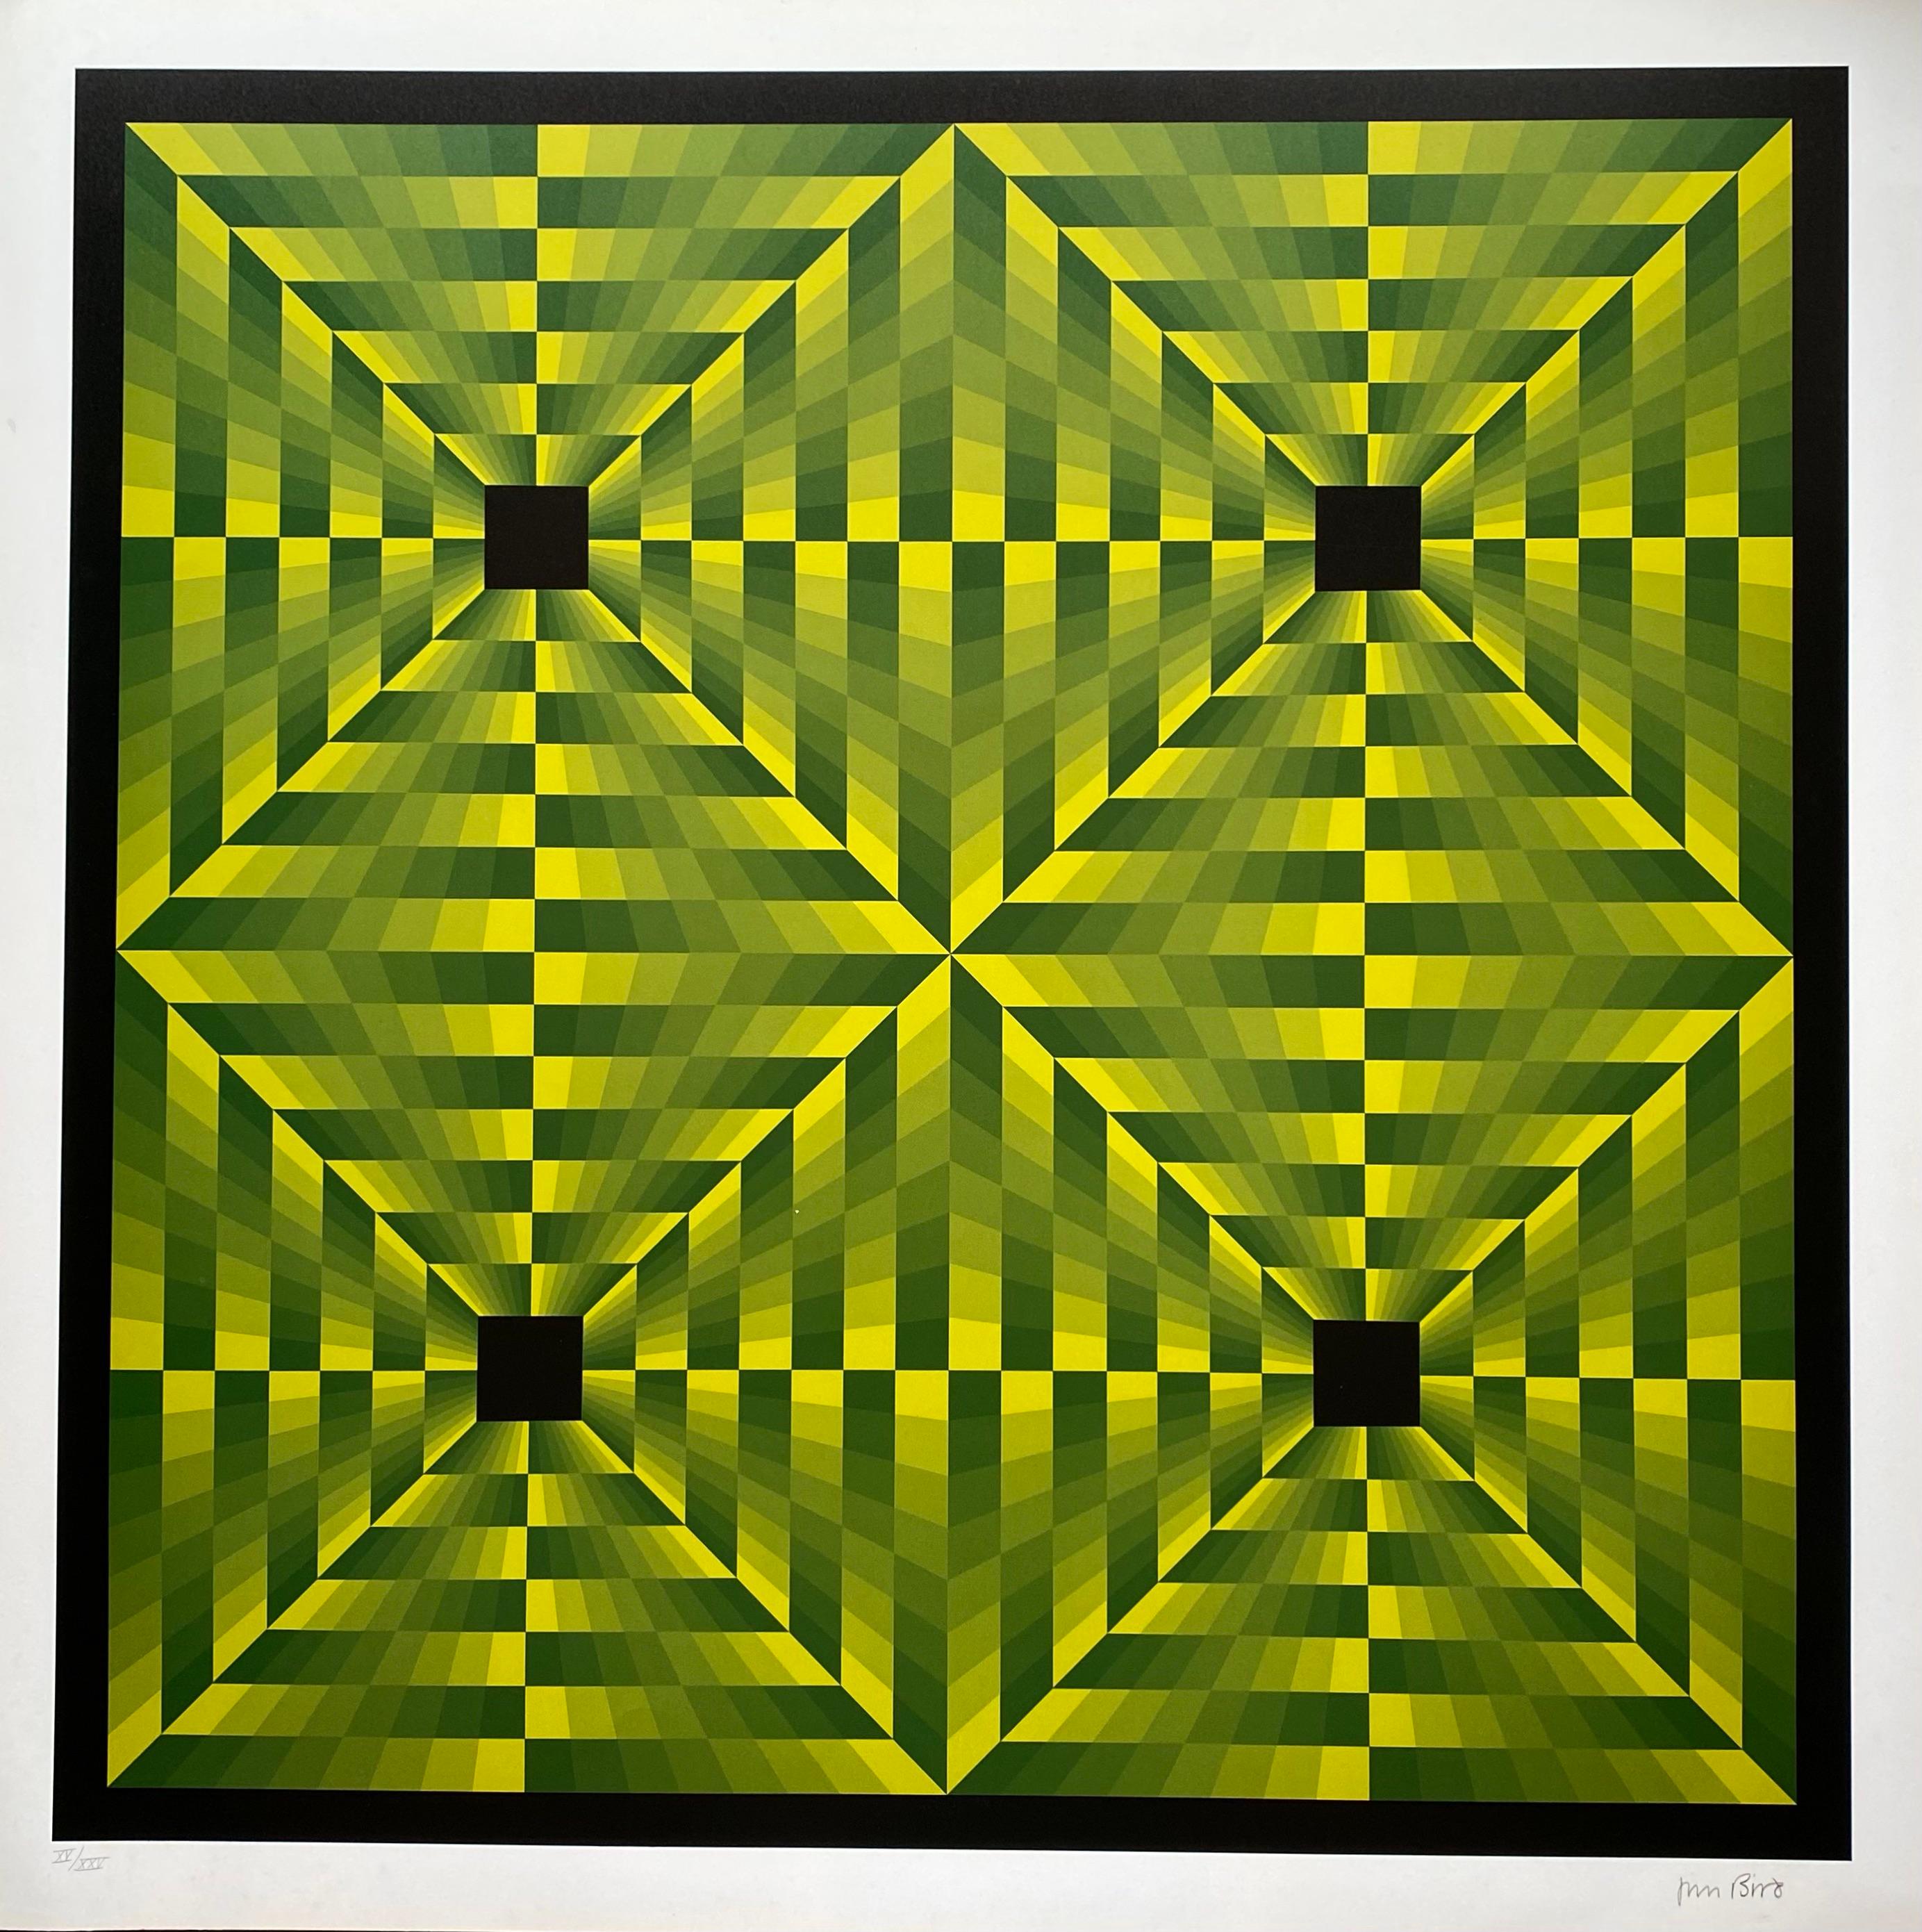 Jim Bird - tribute to Vasarely 
Photolithography
Circa 1970
Signed 
Paper size : 68×68
Image size : 61×61 
Perfect condition 
Published by Poligrafa, Barcelona 